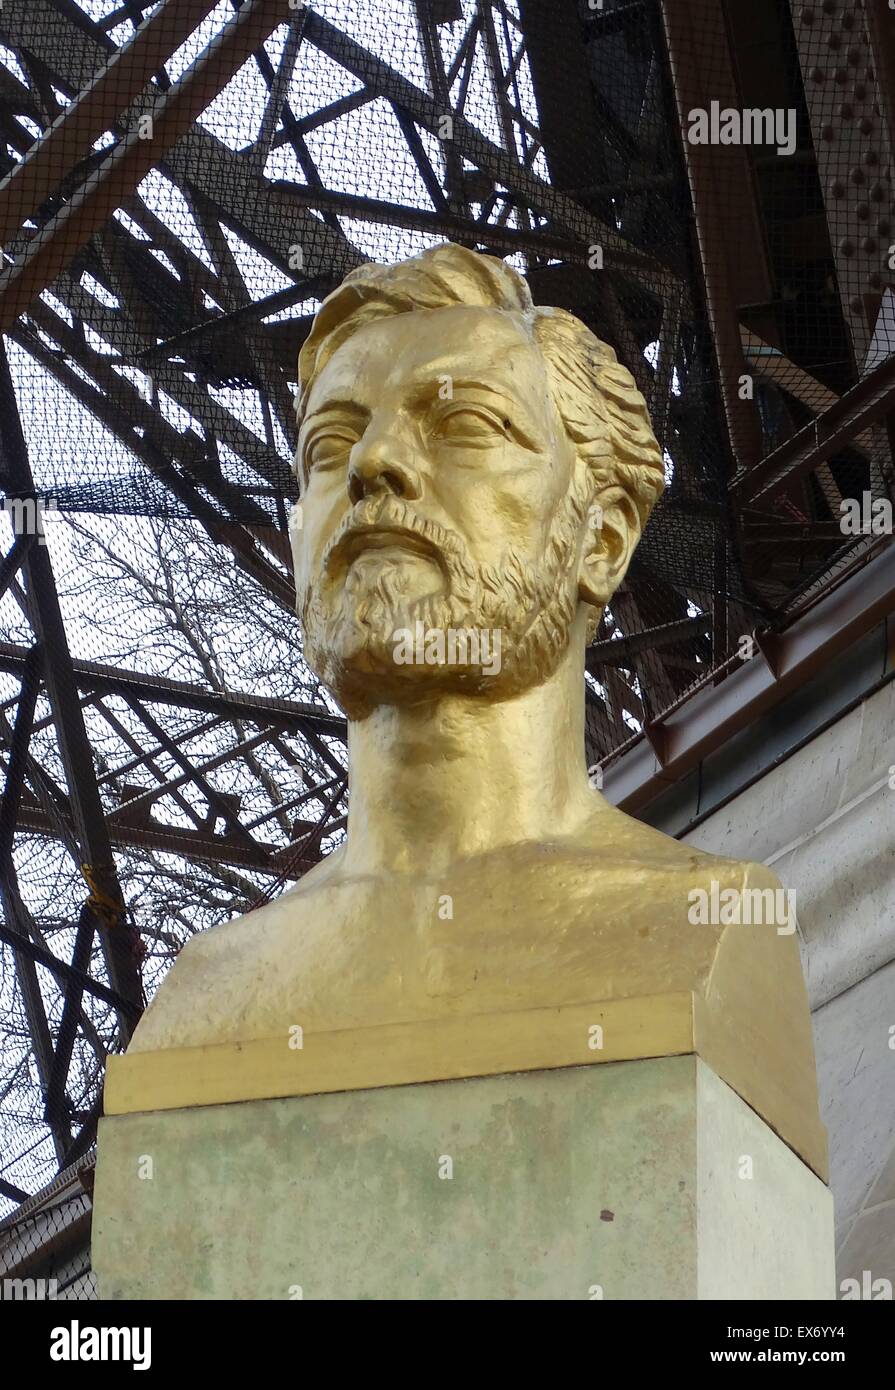 Gilded bust depicting Alexandre Gustave Eiffel (1832 – 1923) French civil engineer and architect of the Eiffel Tower, Paris. Stock Photo